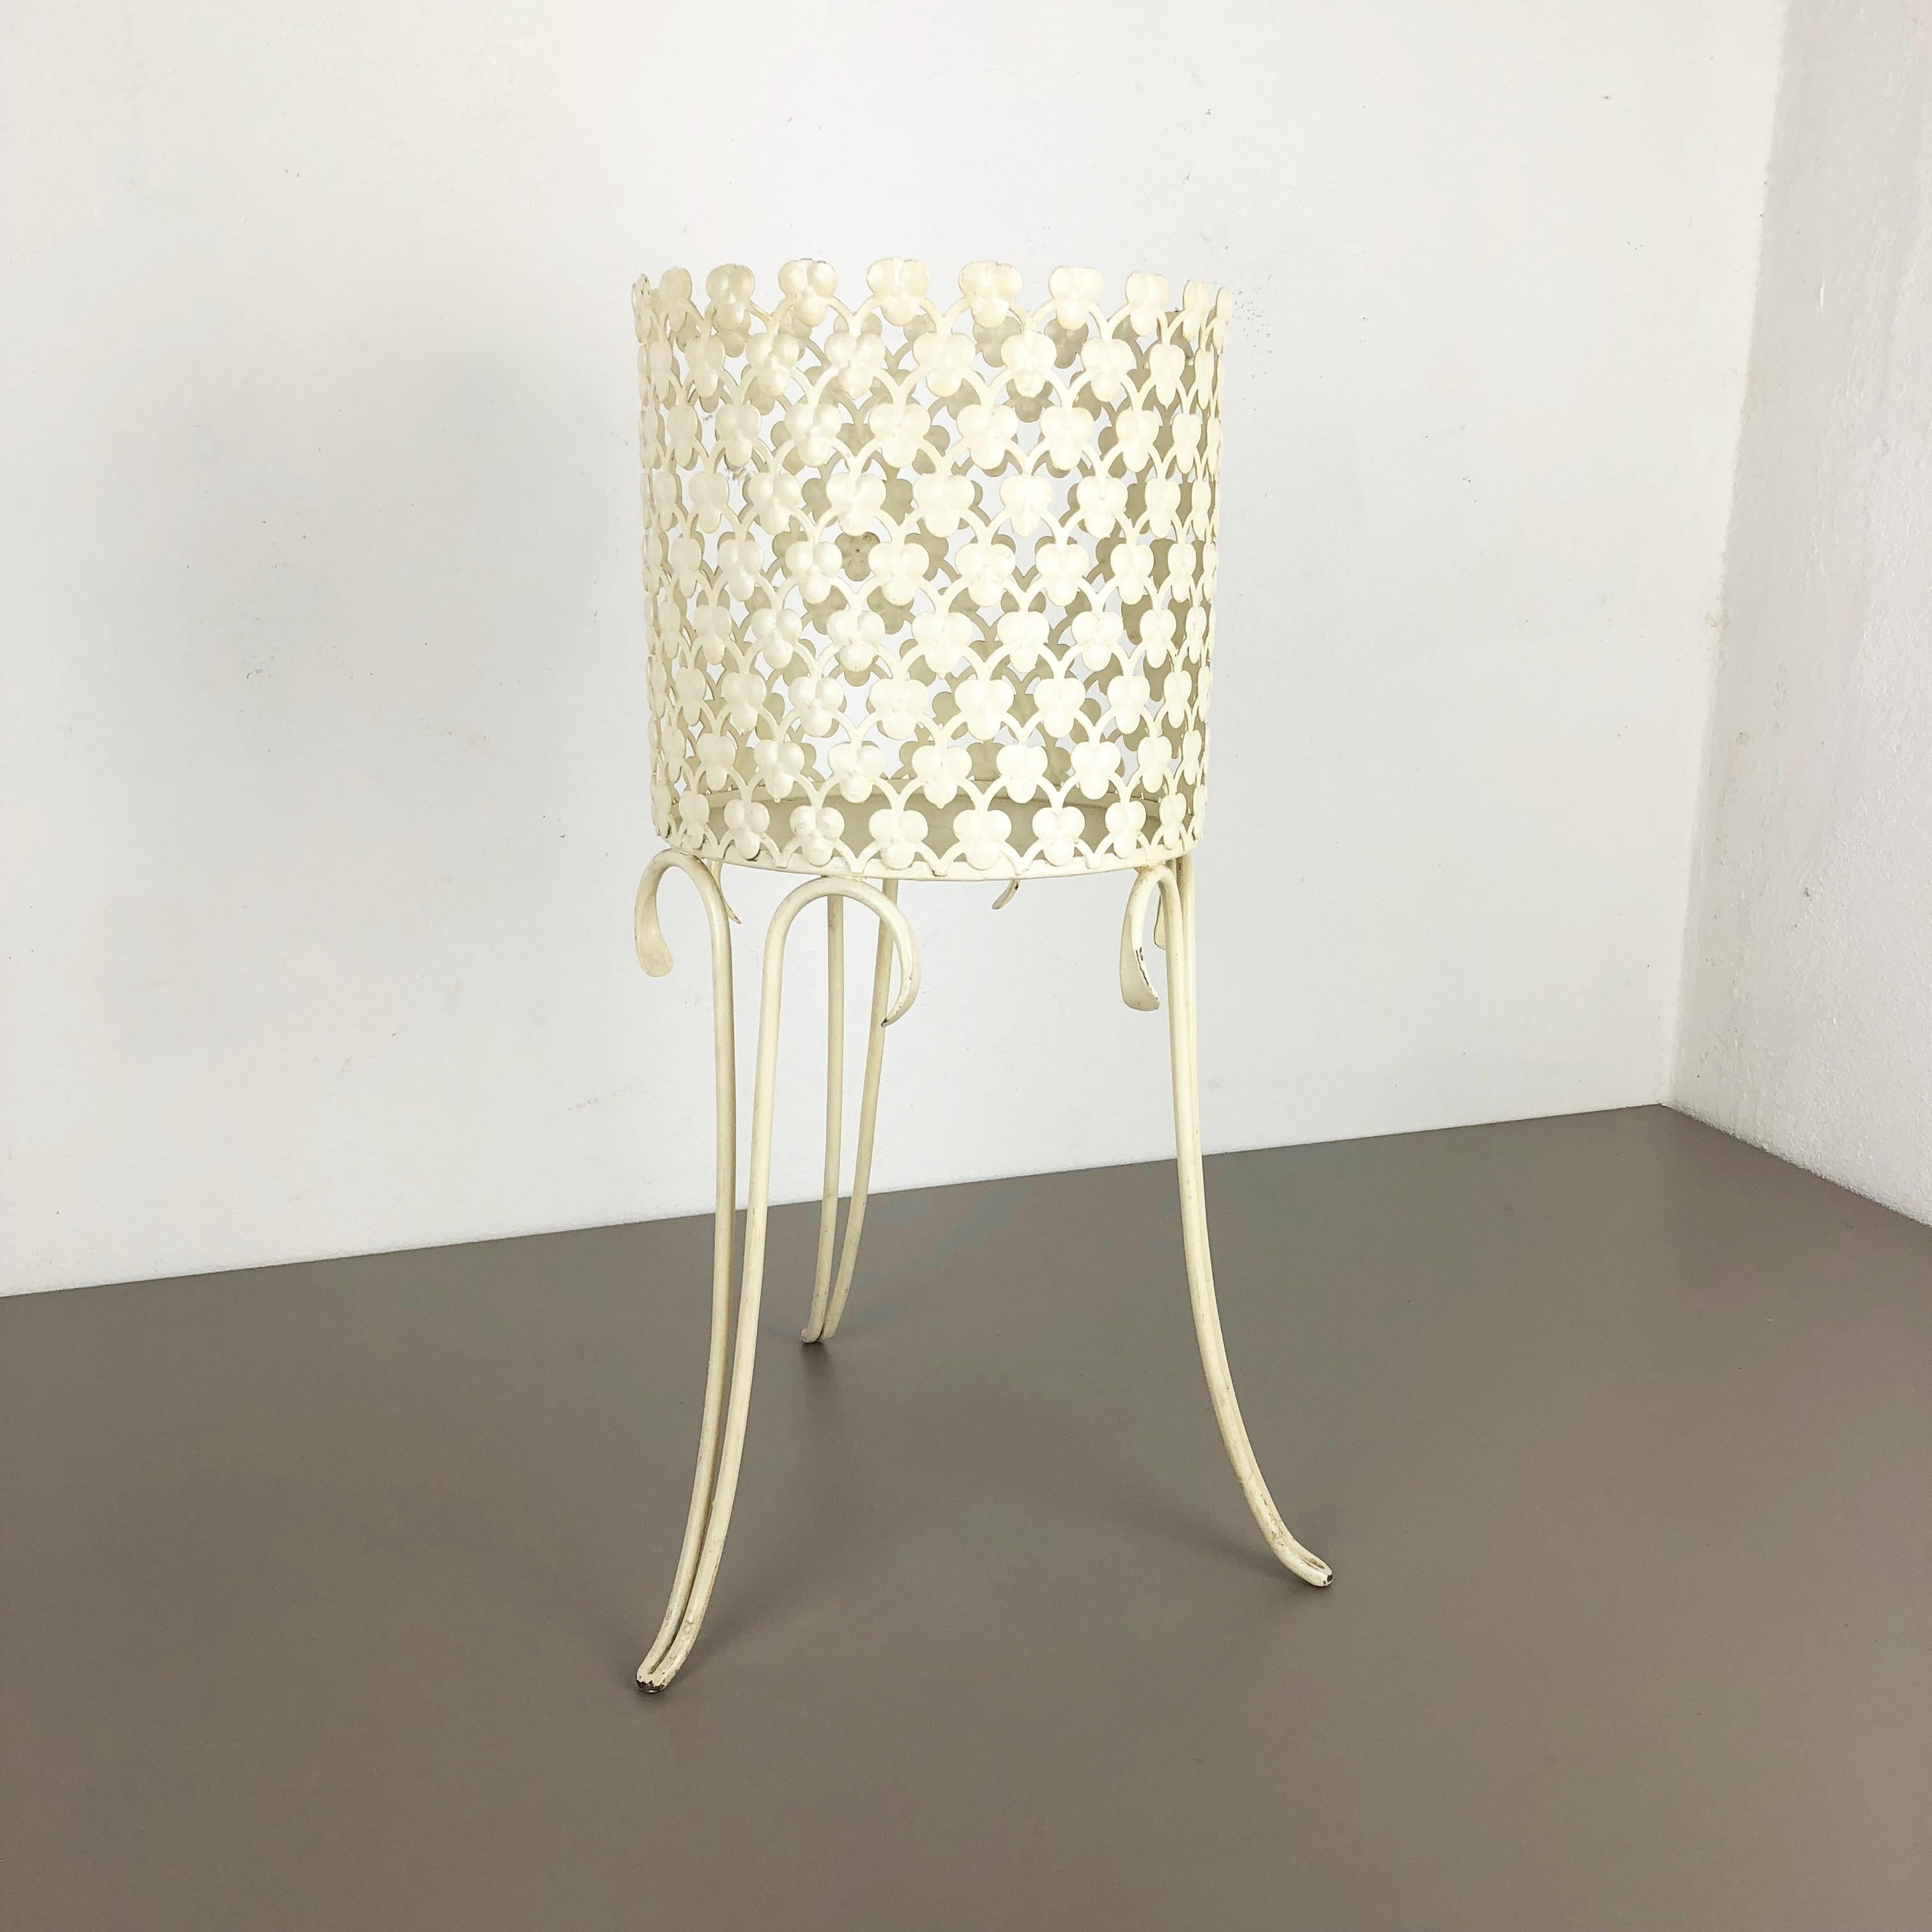 Article:

modernist metal plant pot stand


Origin:

France


Decade:

1960s


Description:

This original modernist plant pot stand element was produced in the 1960s in France. it is made of white lacquered metal with a nice op art